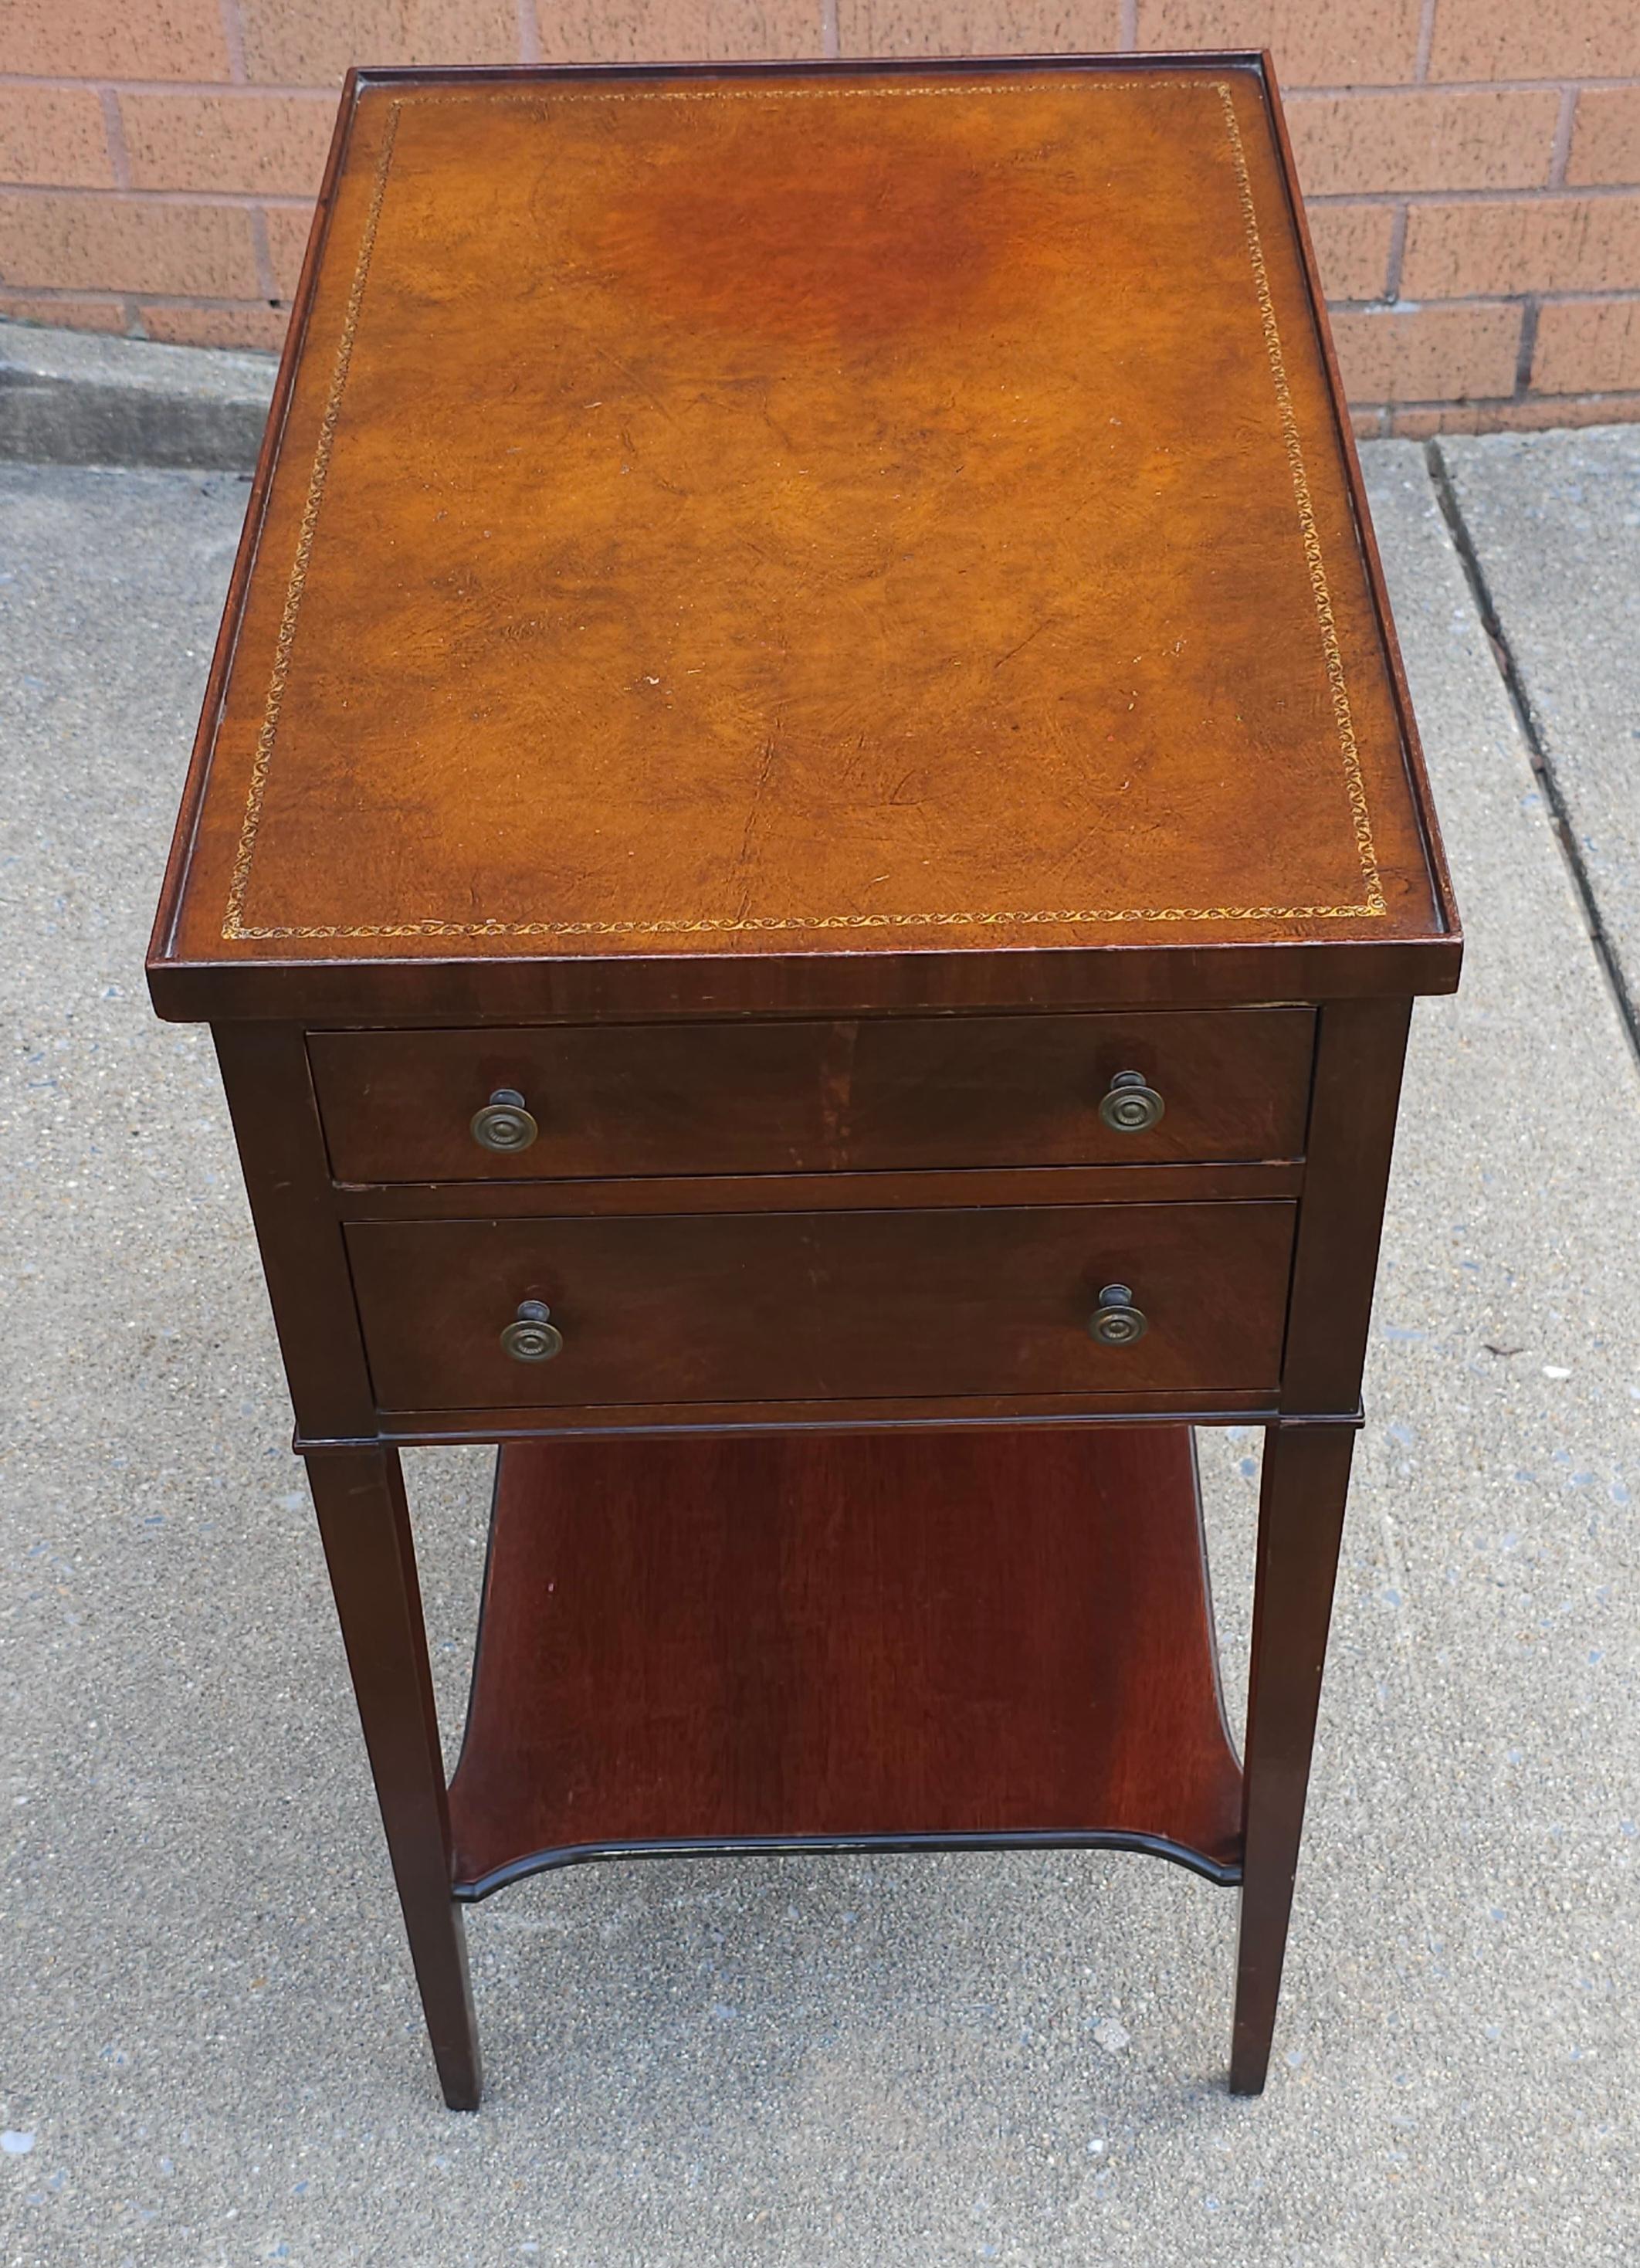 Imperial Furniture Two-Drawer Tooled Leather Mahogany Tiered Side Table In Good Condition For Sale In Germantown, MD